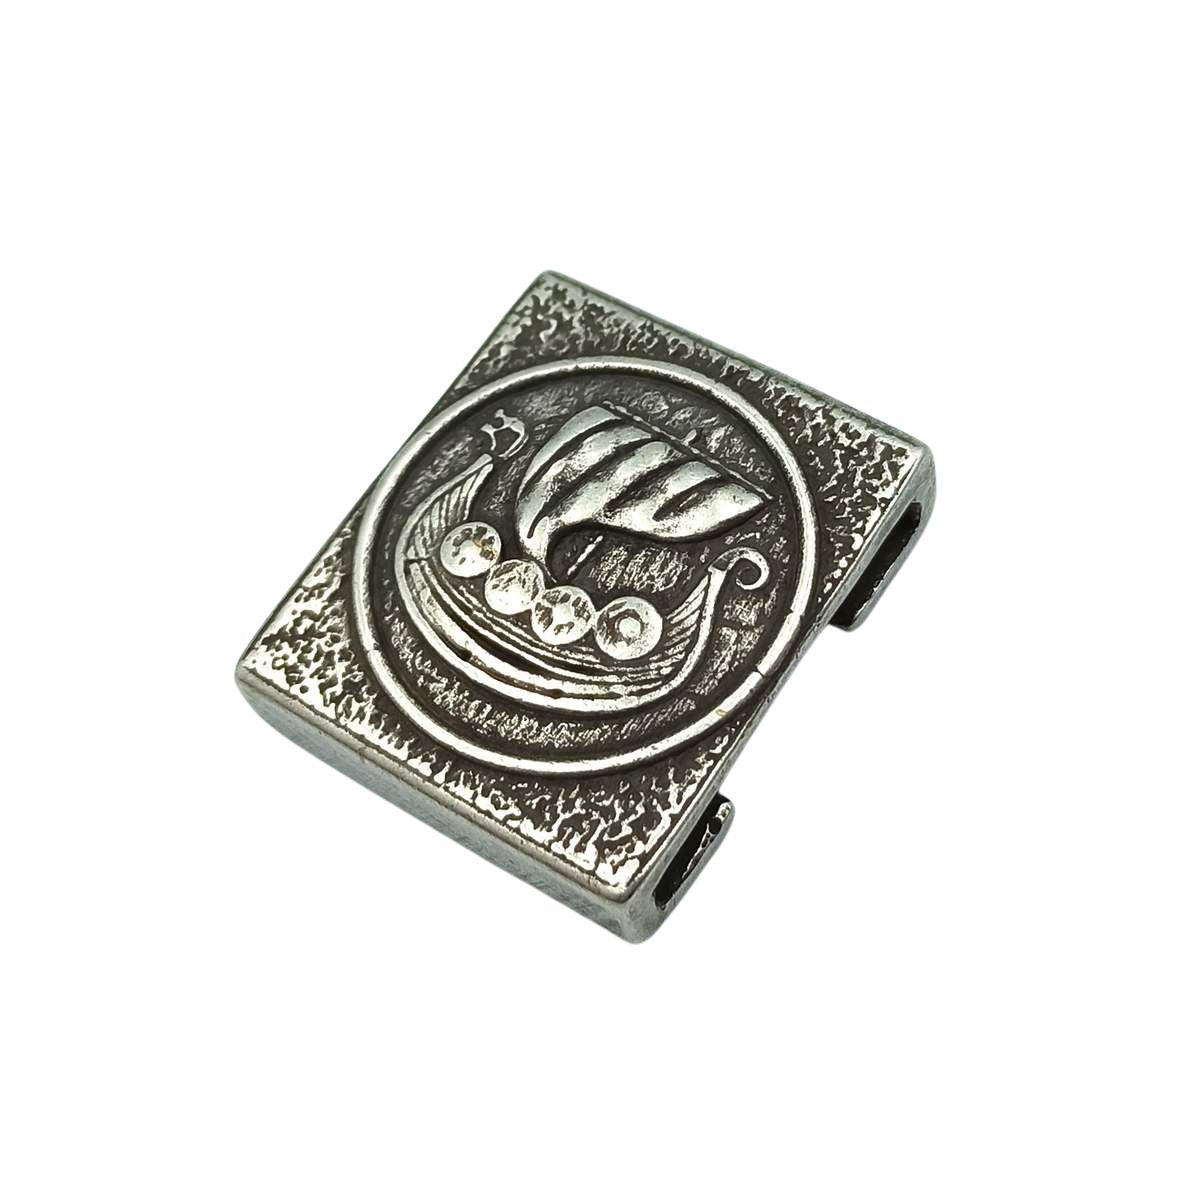 WikkedKnot Jewelry Yggdrasil Tree Molle Clip Tactical Military EDC Gear Silver Plated Bronze